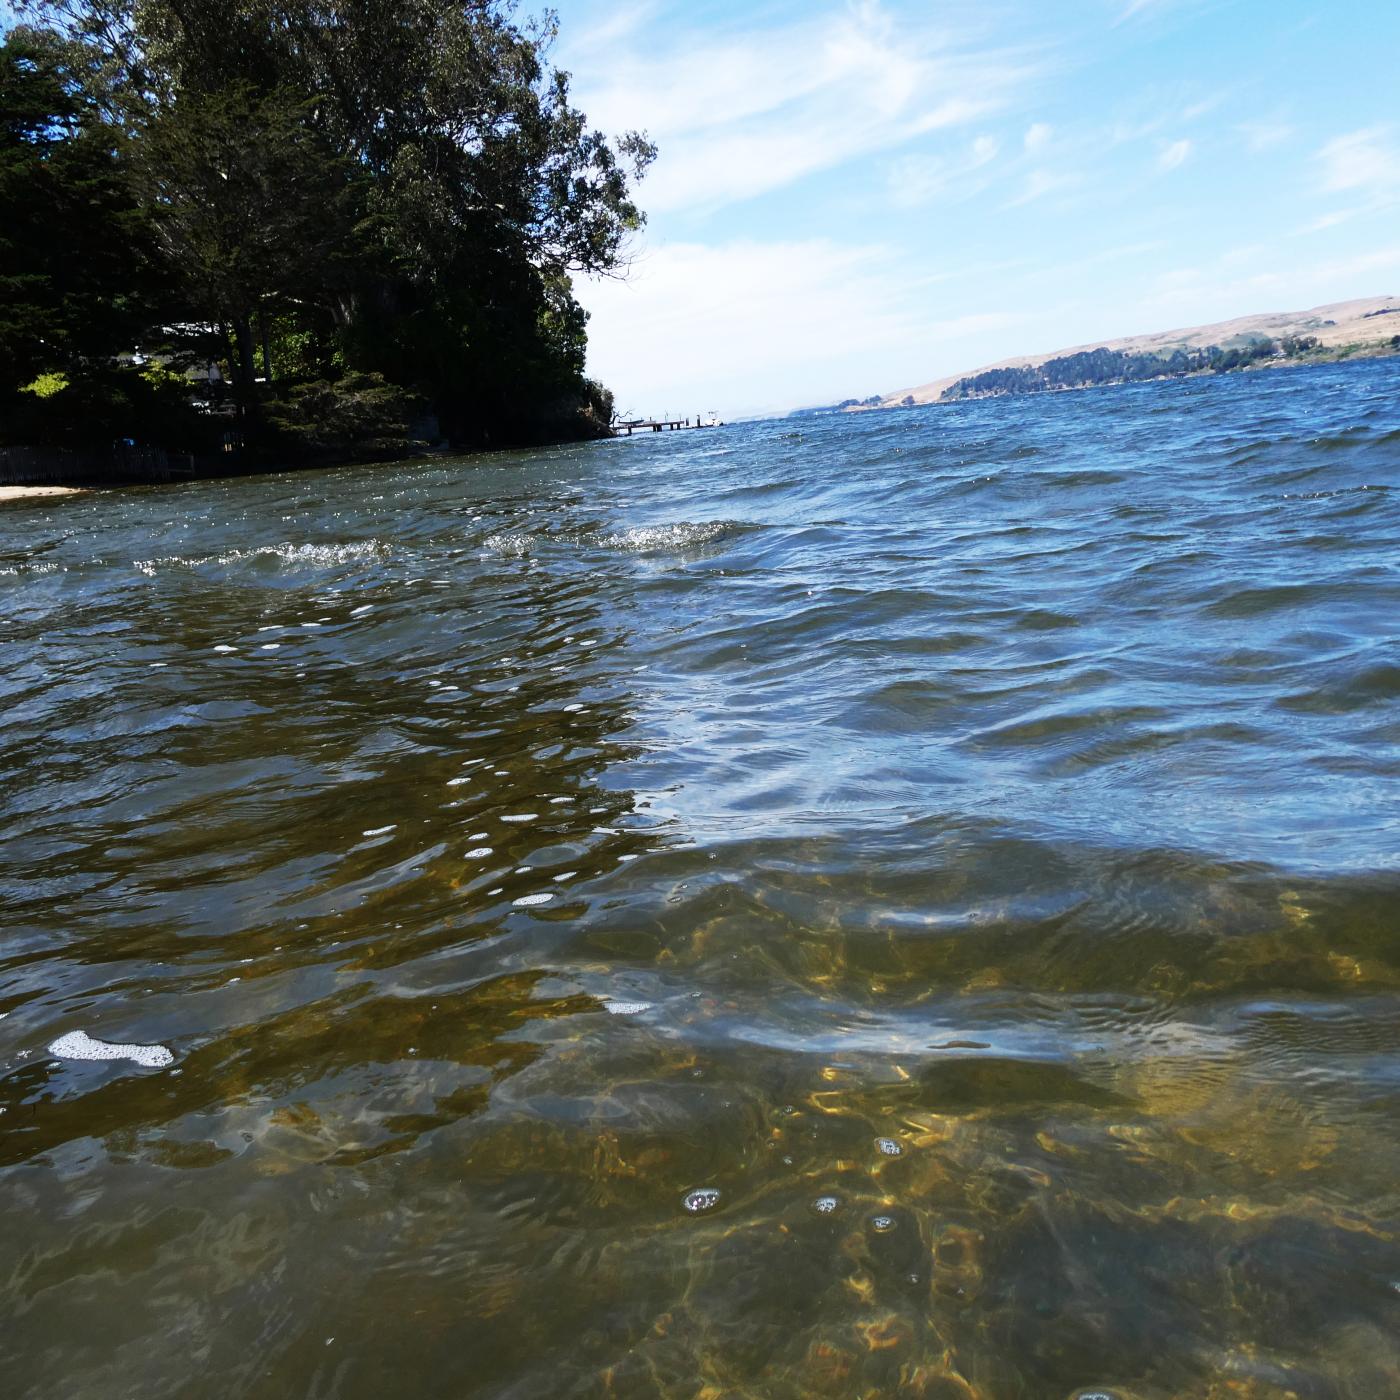 Swimming in Tomales Bay  | Buy this image